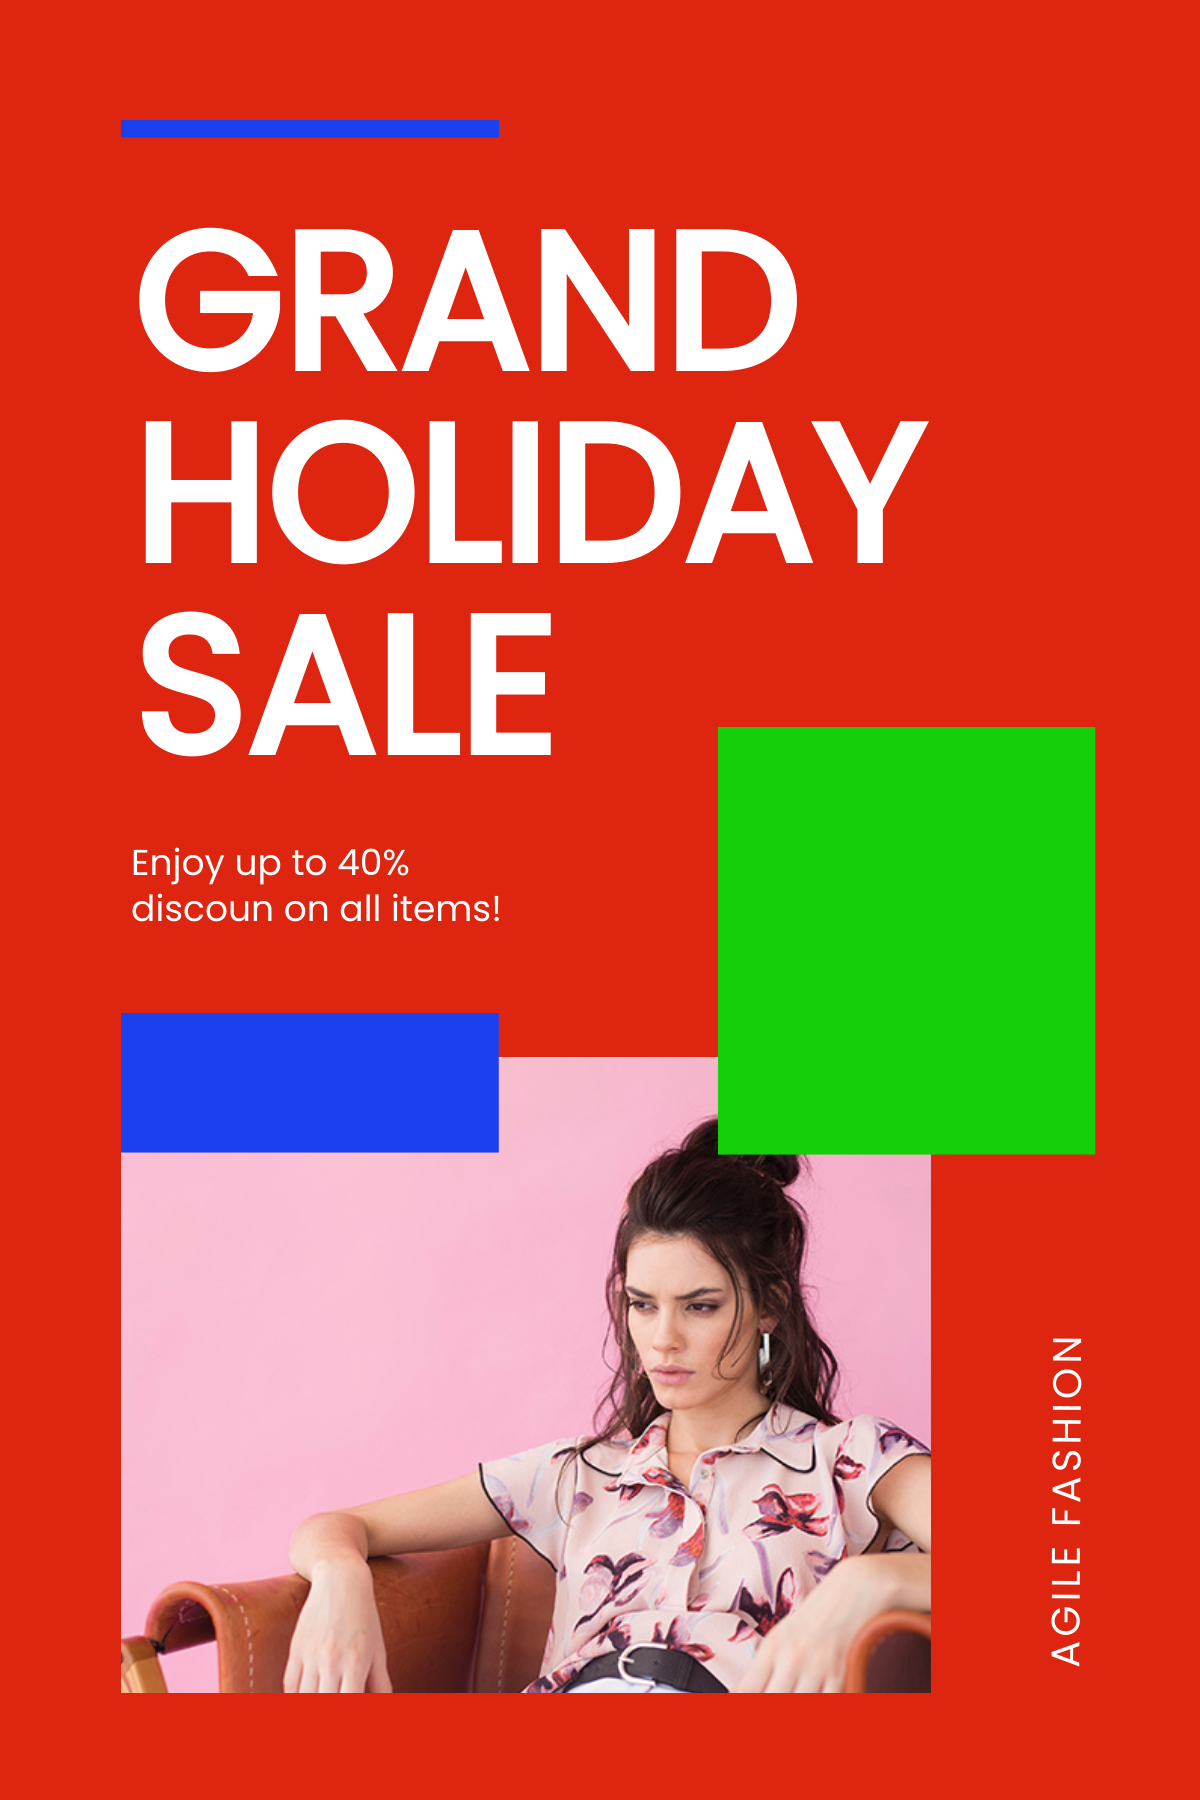 Holiday Offer Sale Pinterest Pin Template